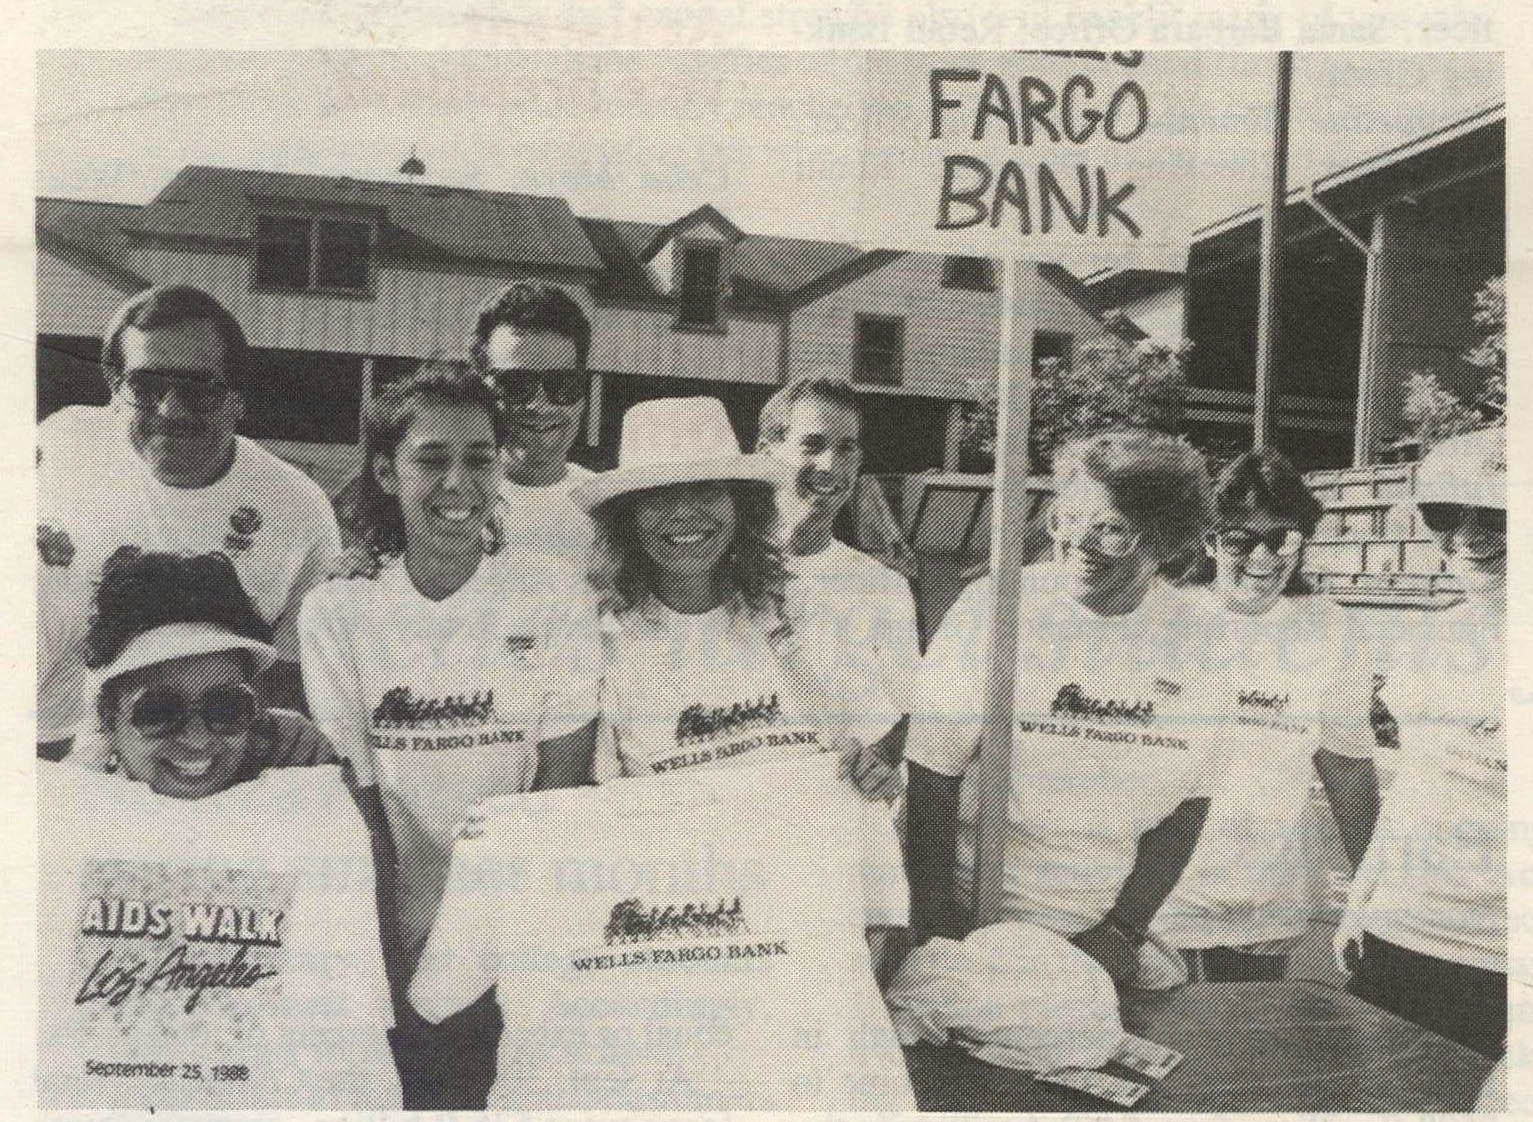 Group of people wearing Wells Fargo shirts gather outside. Part of a sign is visible reading: Fargo Bank. One person holds up a shirt that reads: AIDS Walk Los Angeles.